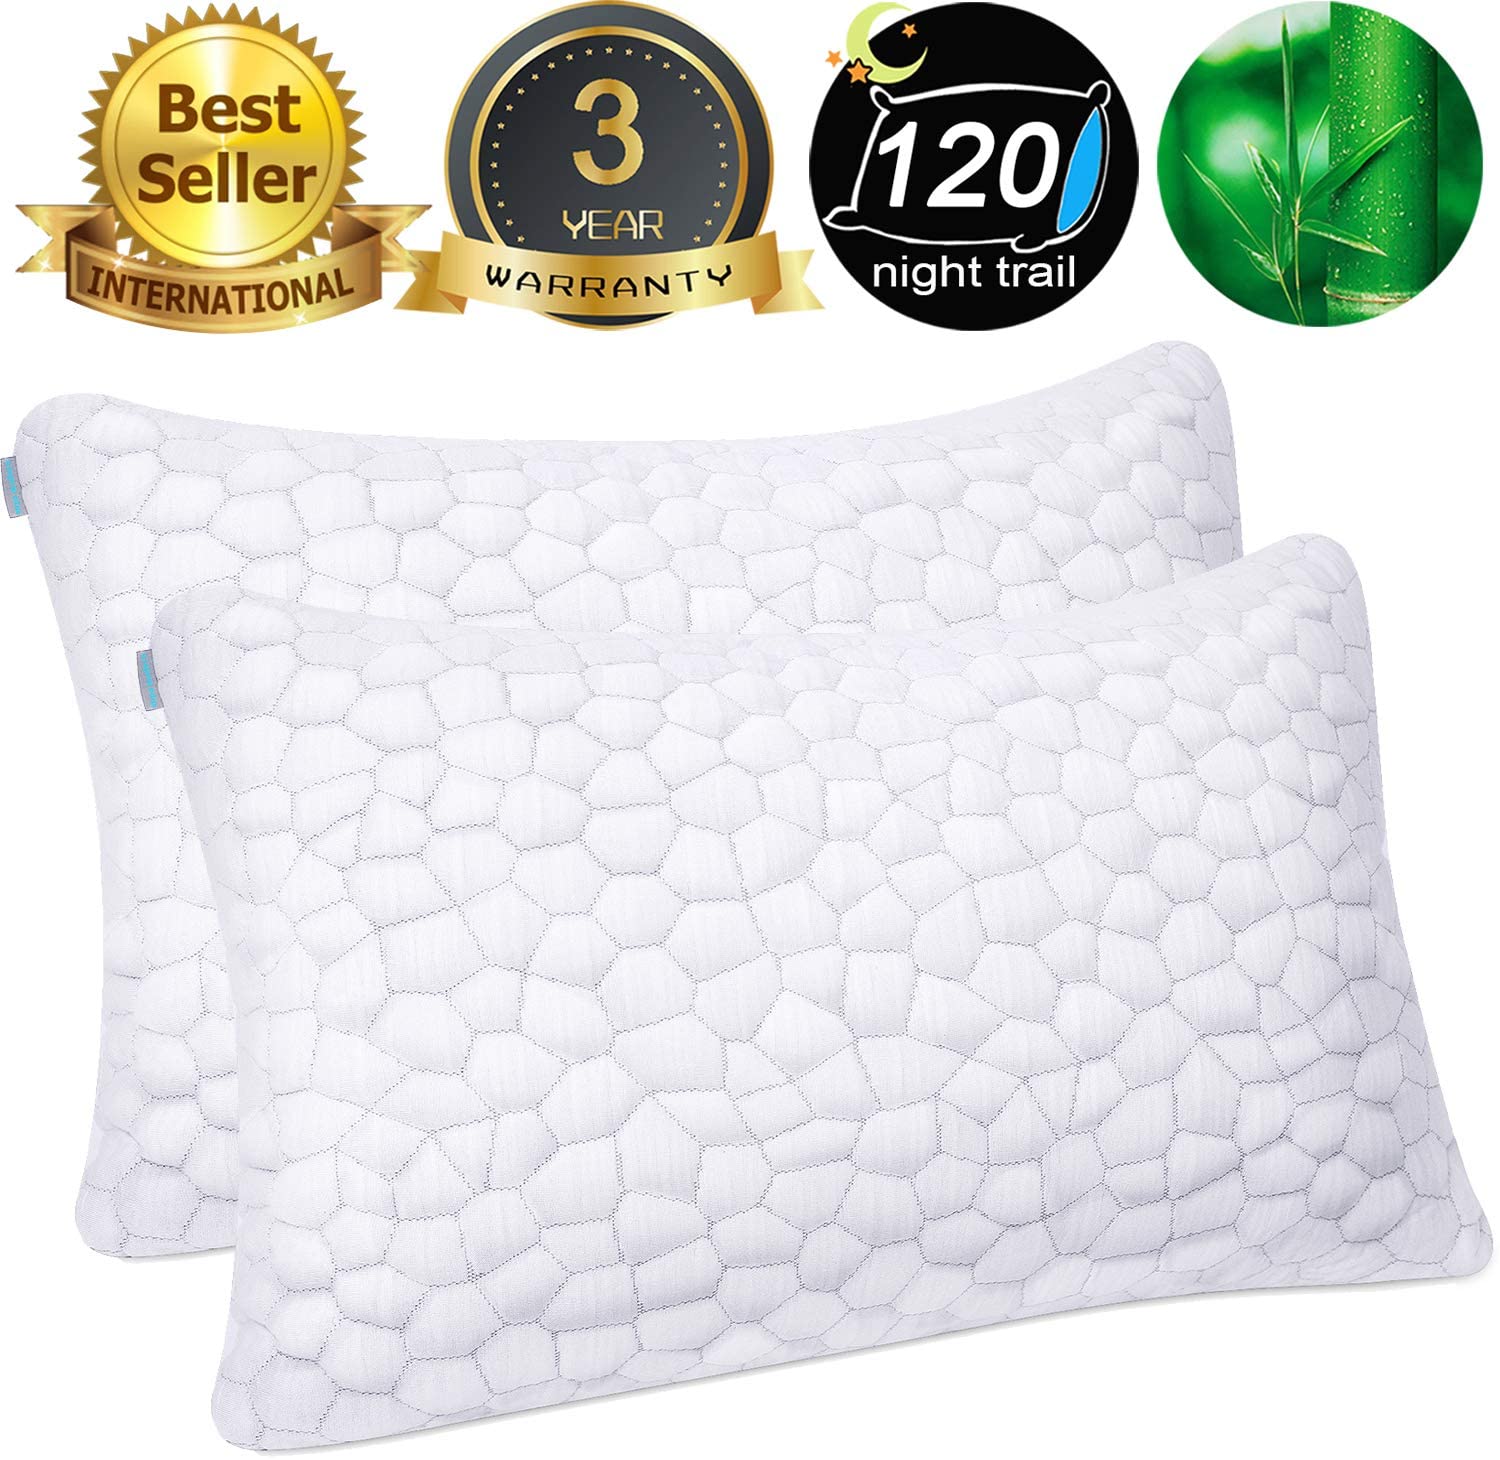 Shredded Memory Foam Pillows King Size Set of 2, Cooling Pillows